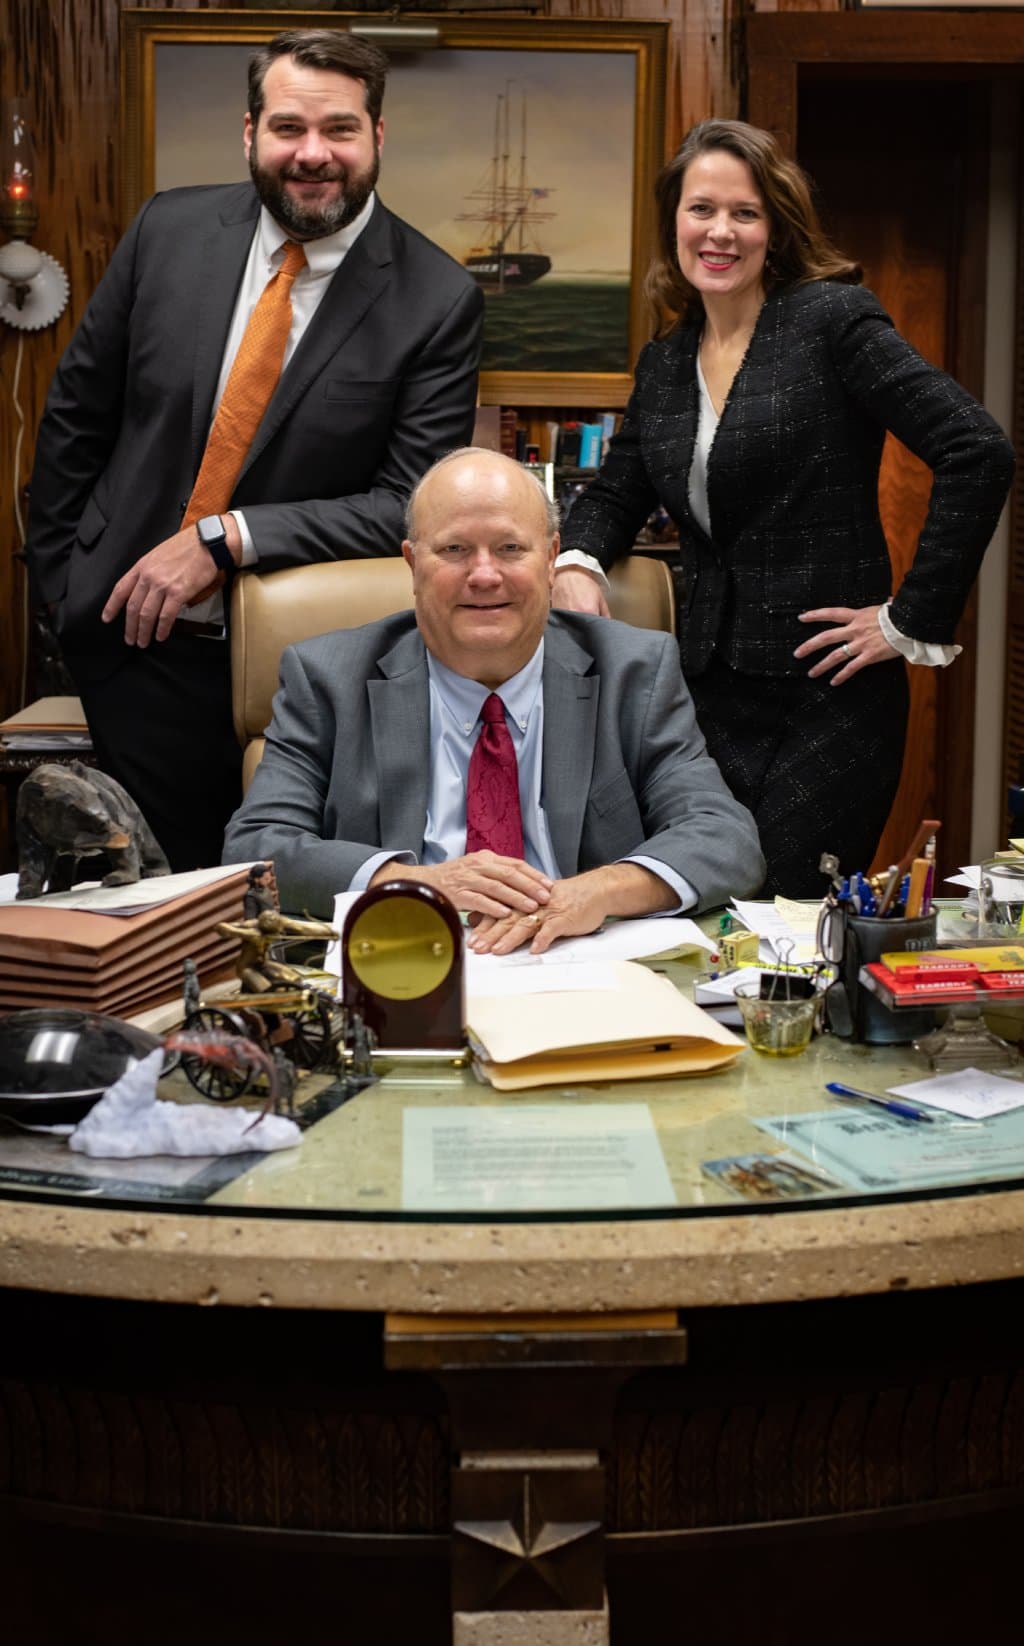 A group of attorneys standing around a table with papers and a man sitting at a desk.